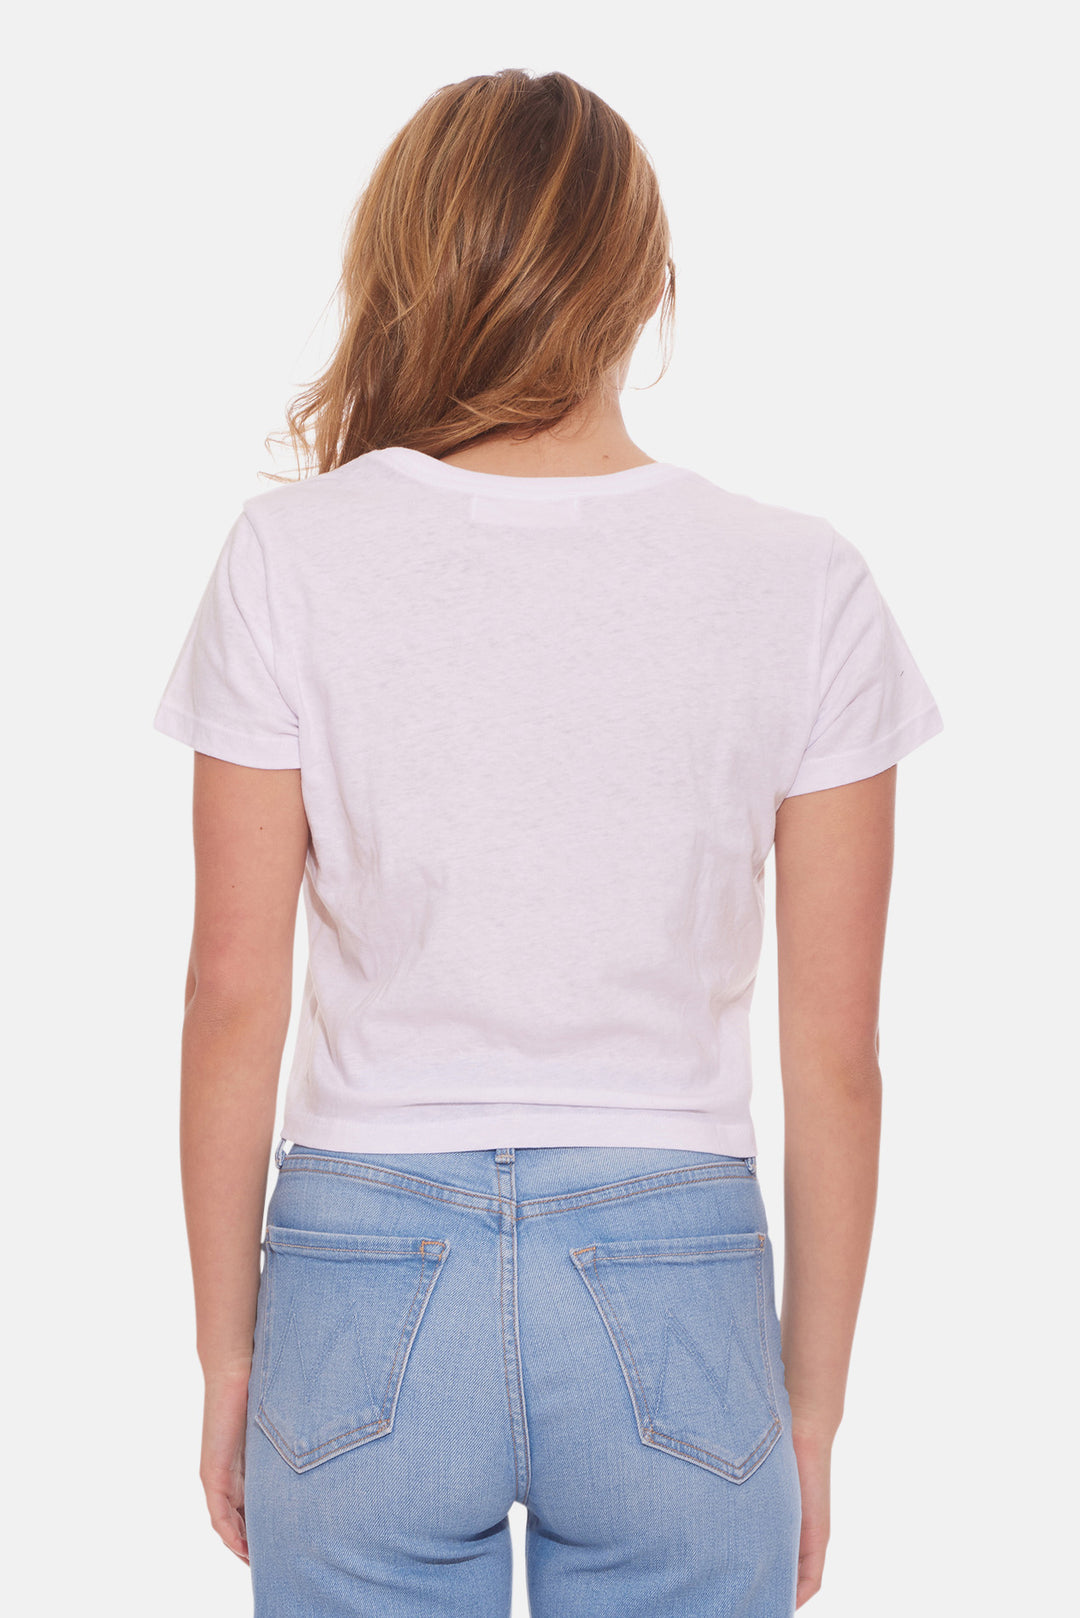 Uptown Culture Cropped Tee White